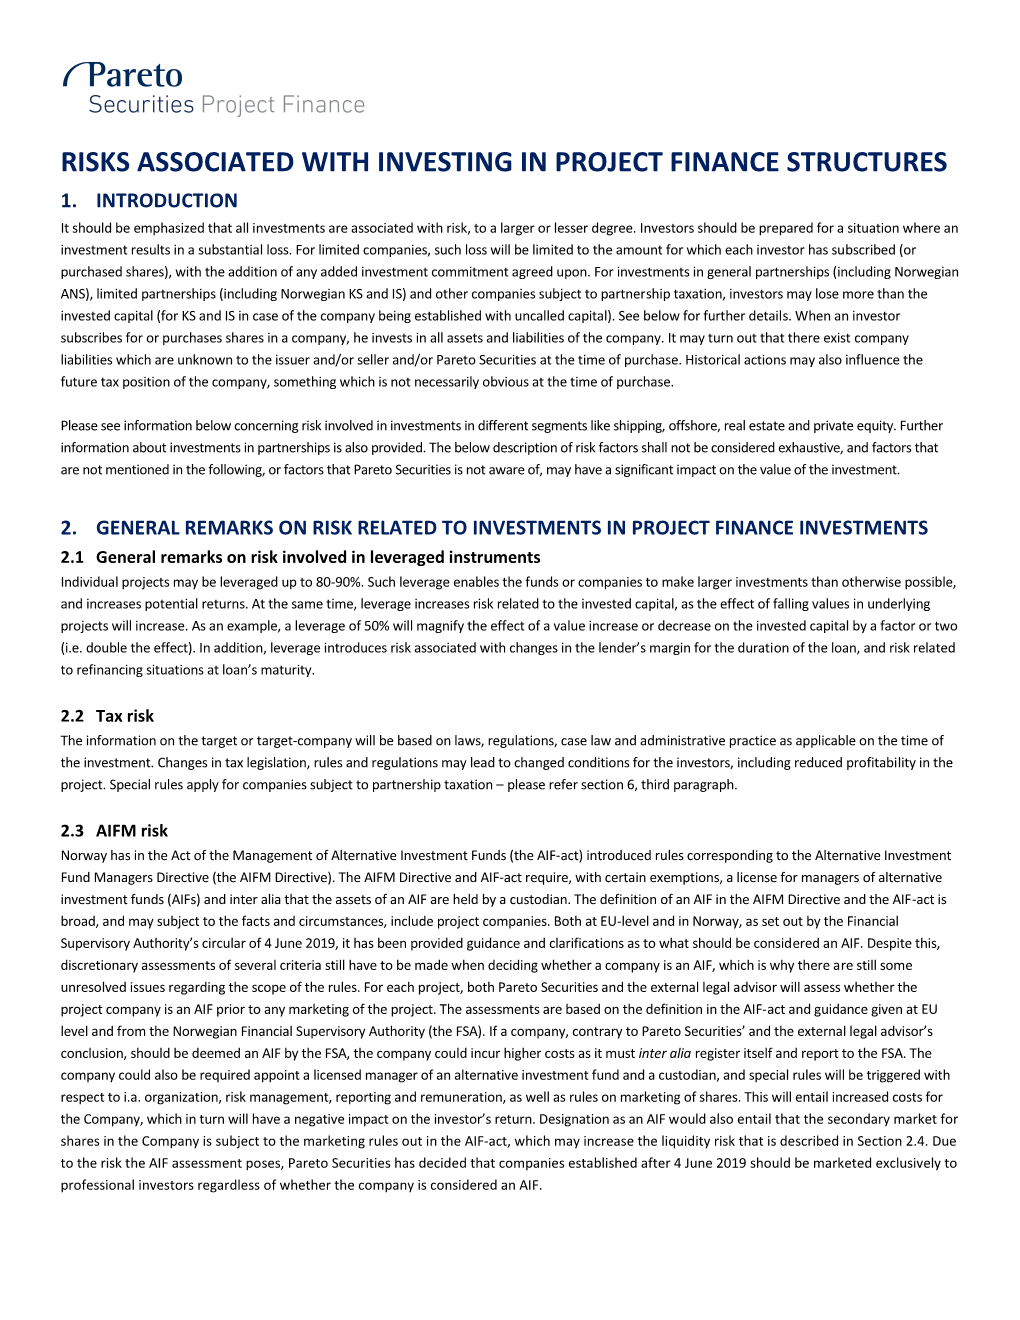 Risks Associated with Investing in Project Finance Structures 1